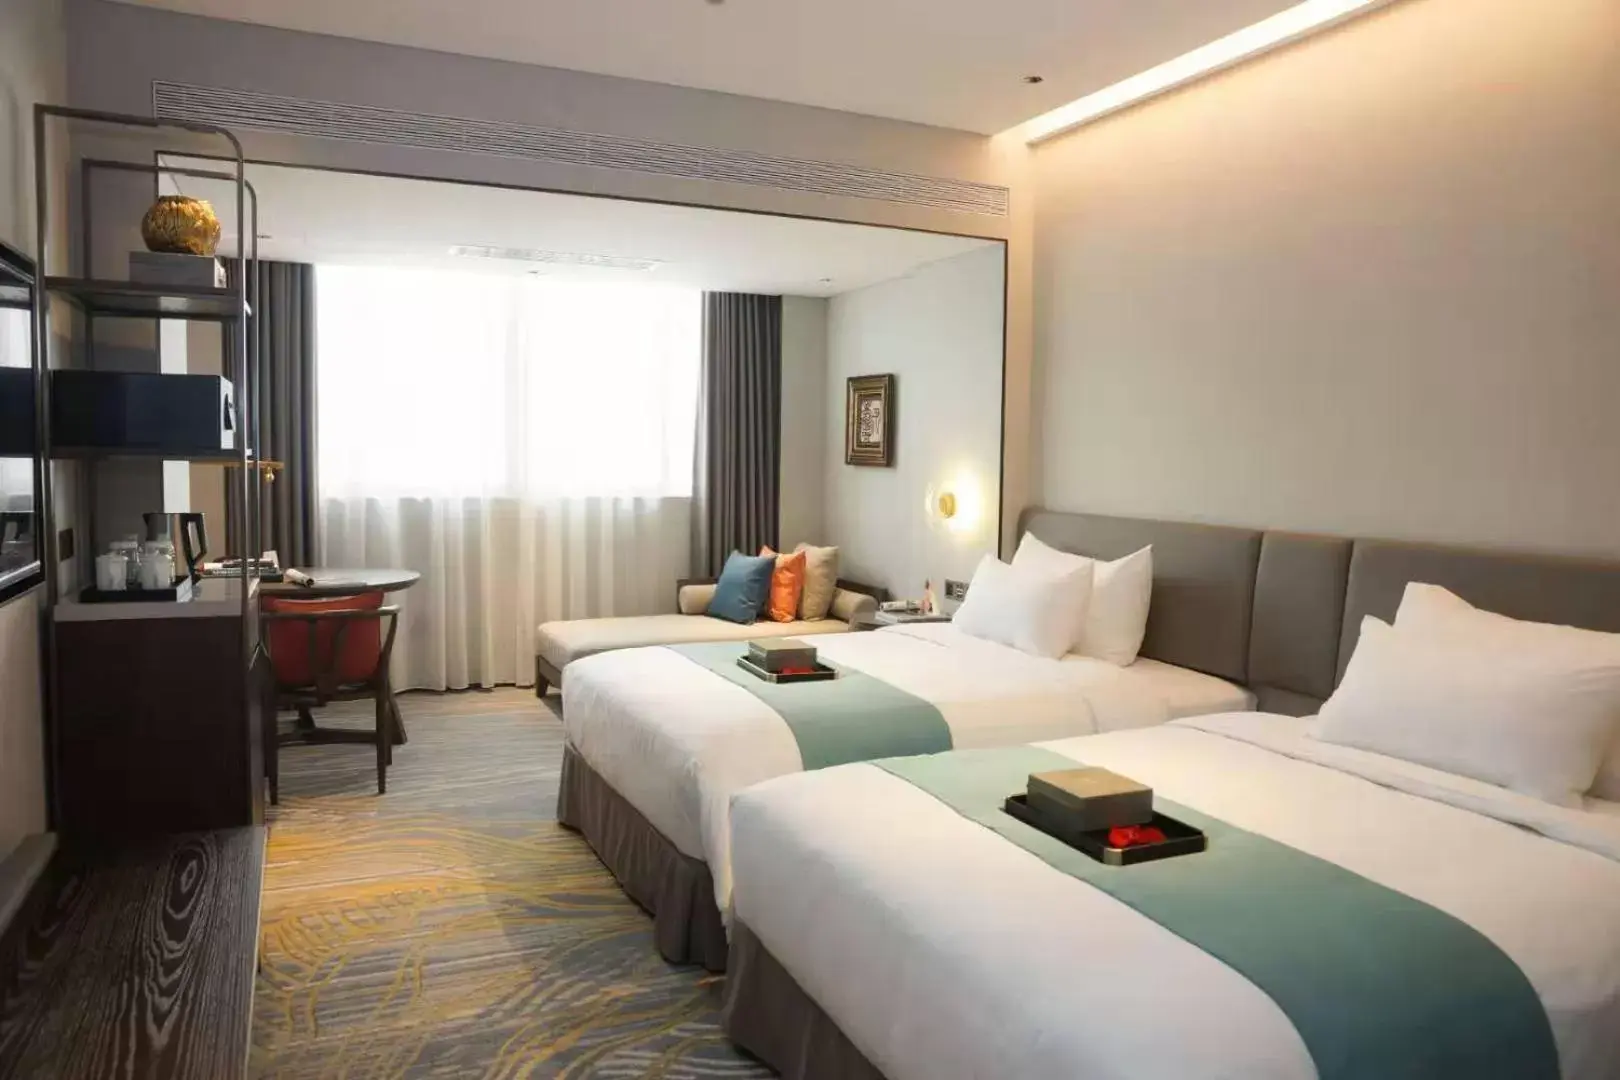 Bed in Dong Fang Hotel Guangzhou, Canton Fair Free Shuttle Bus, Canton Fair Buyer Official Registration